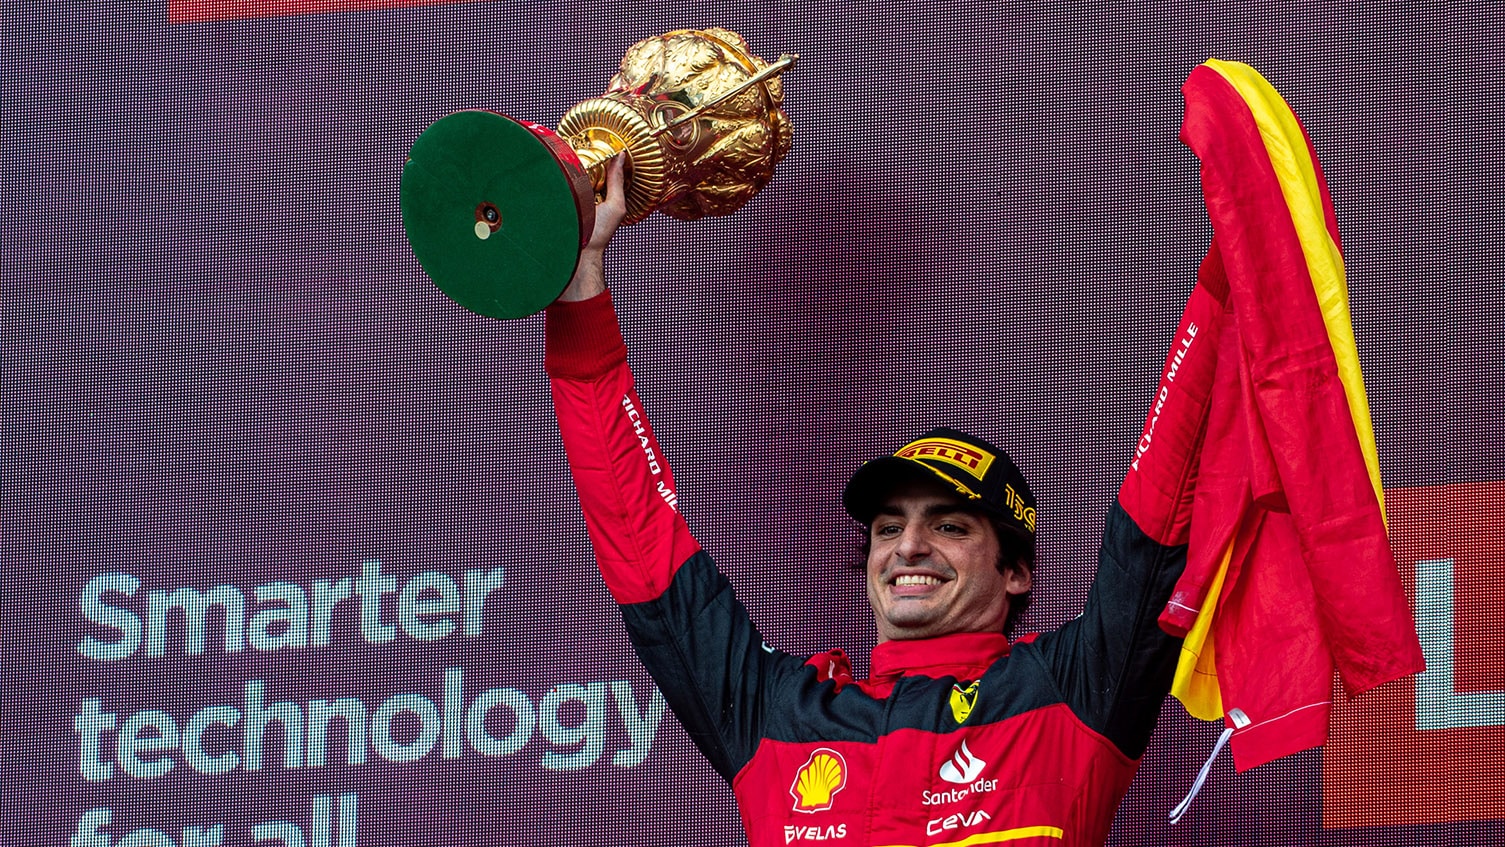 Carlos Sainz takes his first F1 win in Silverstone thriller